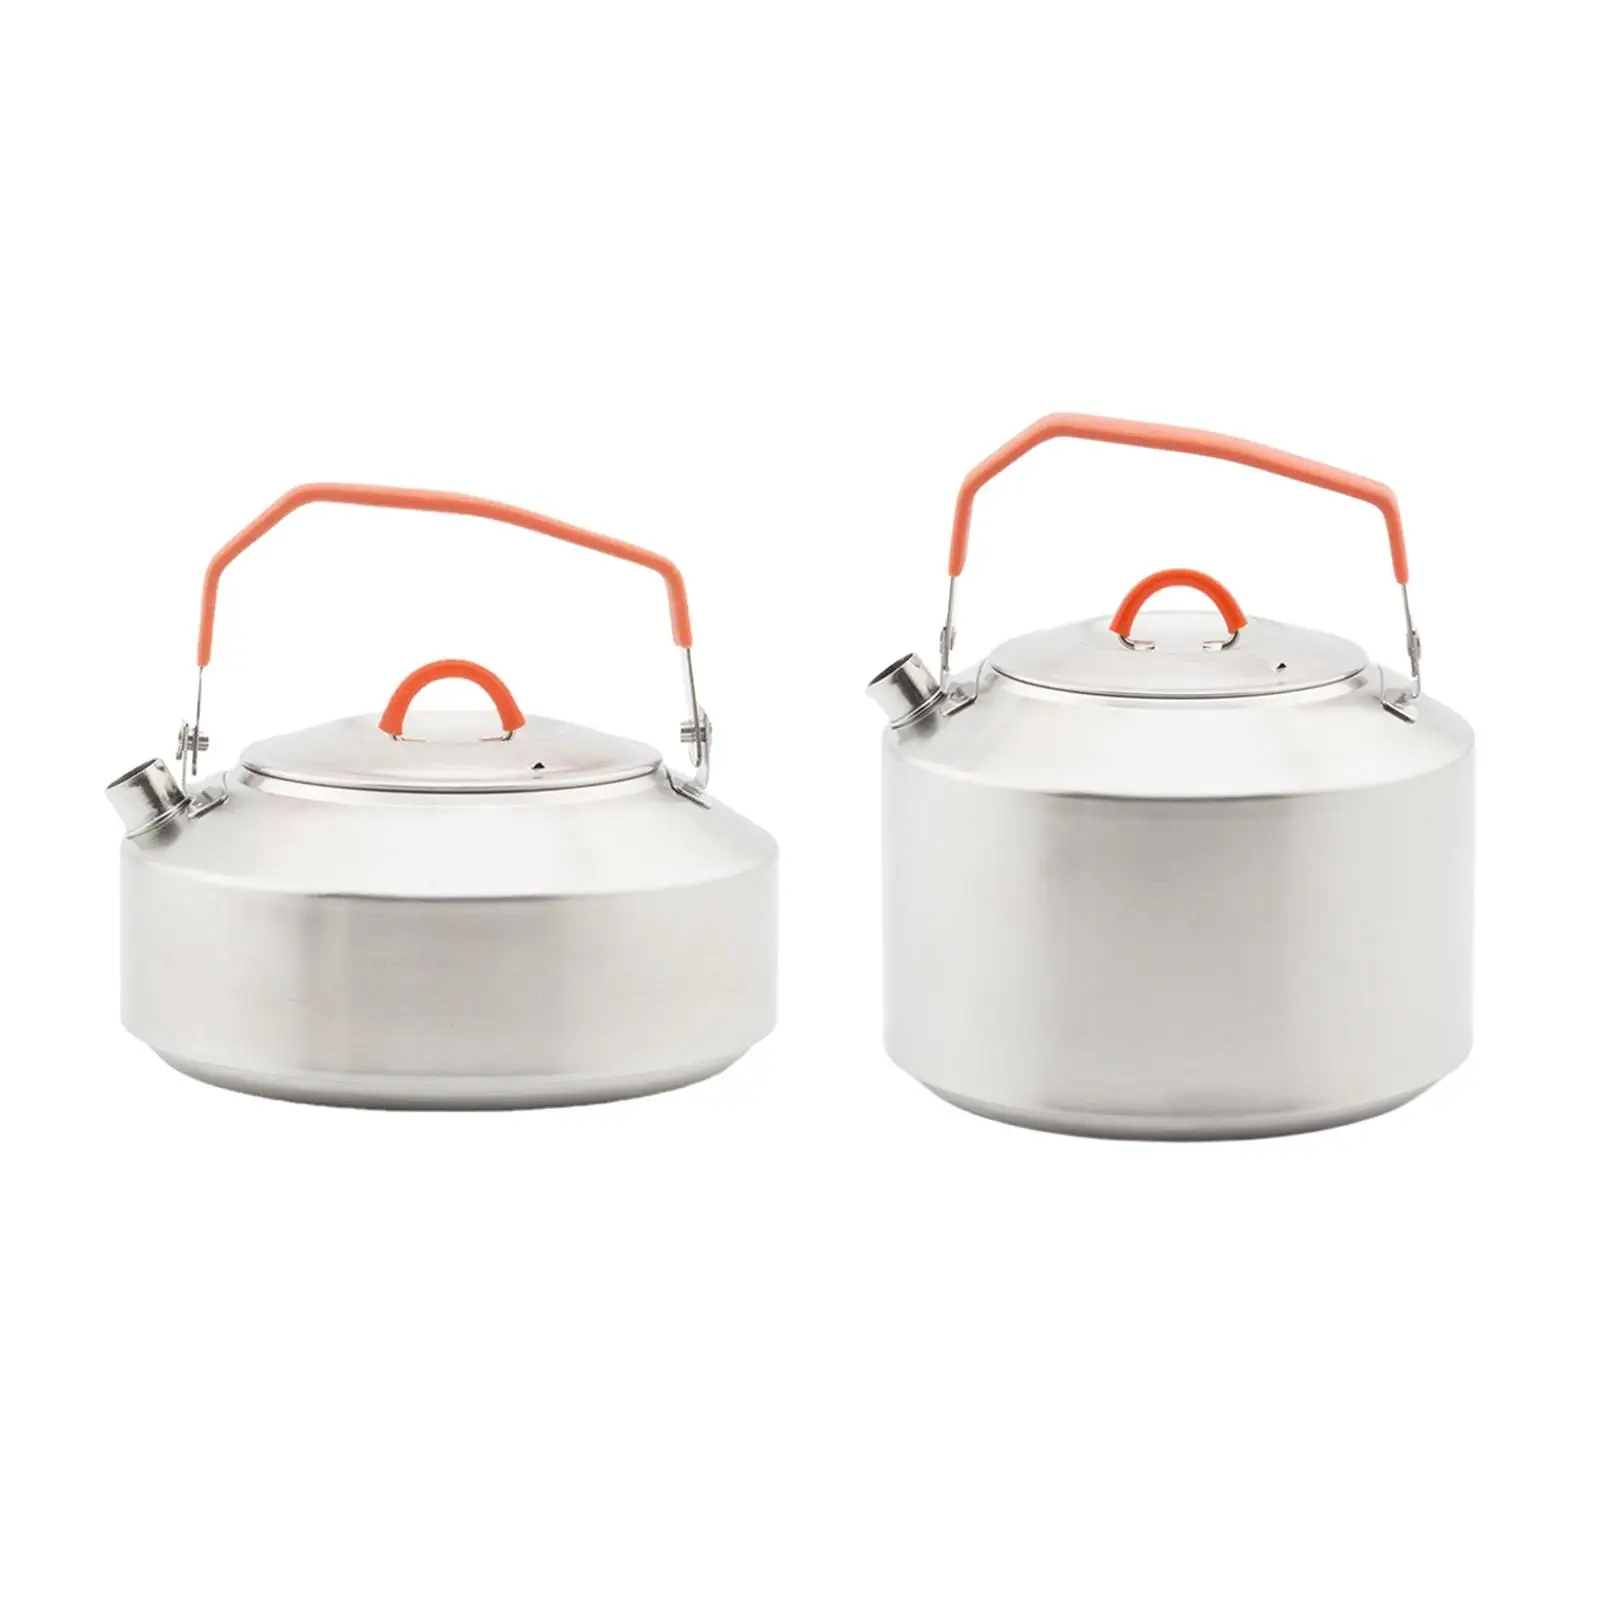 Stainless Steel Camping Kettle Camp Tea Pot Water Kettle for Backpacking